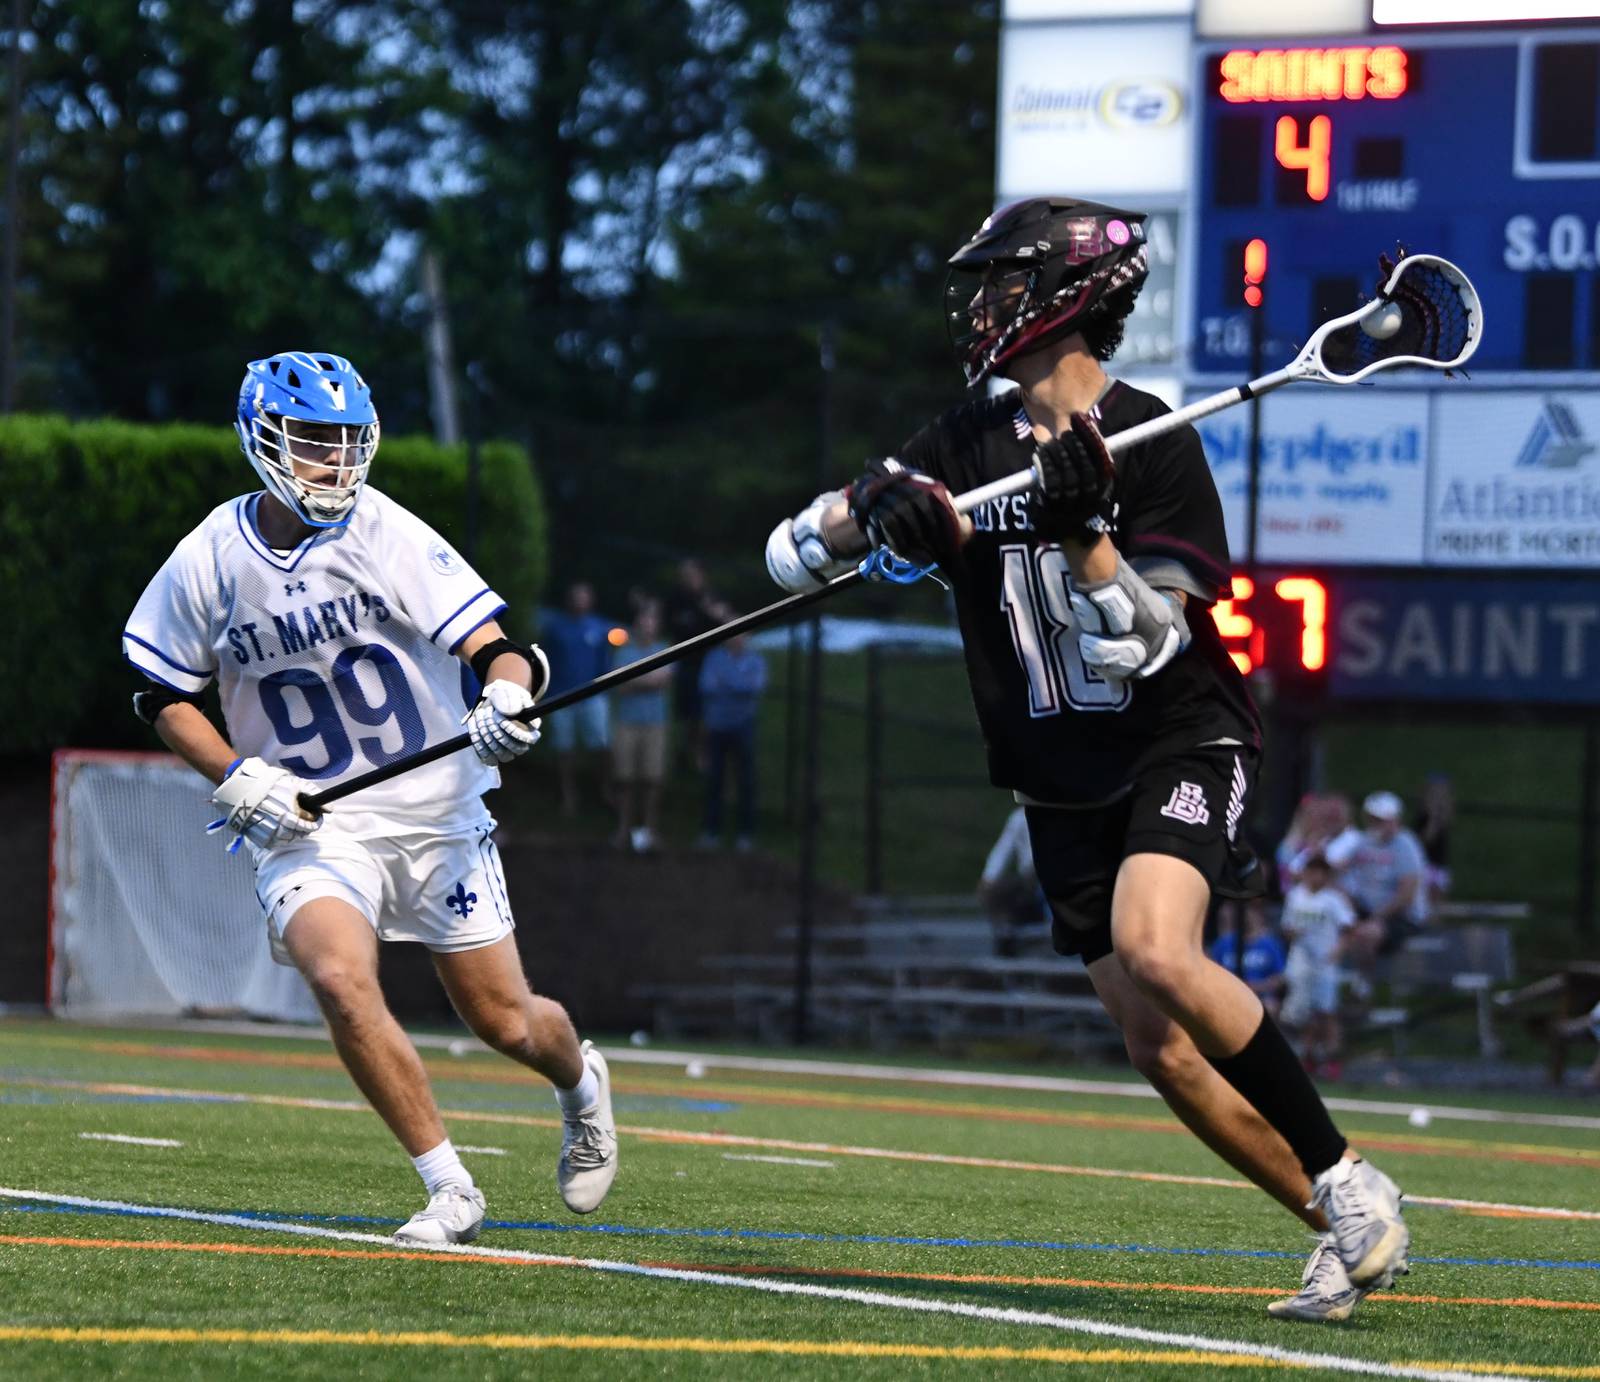 Boys’ Latin bounces No. 3 St. Mary’s from MIAA A lacrosse playoffs